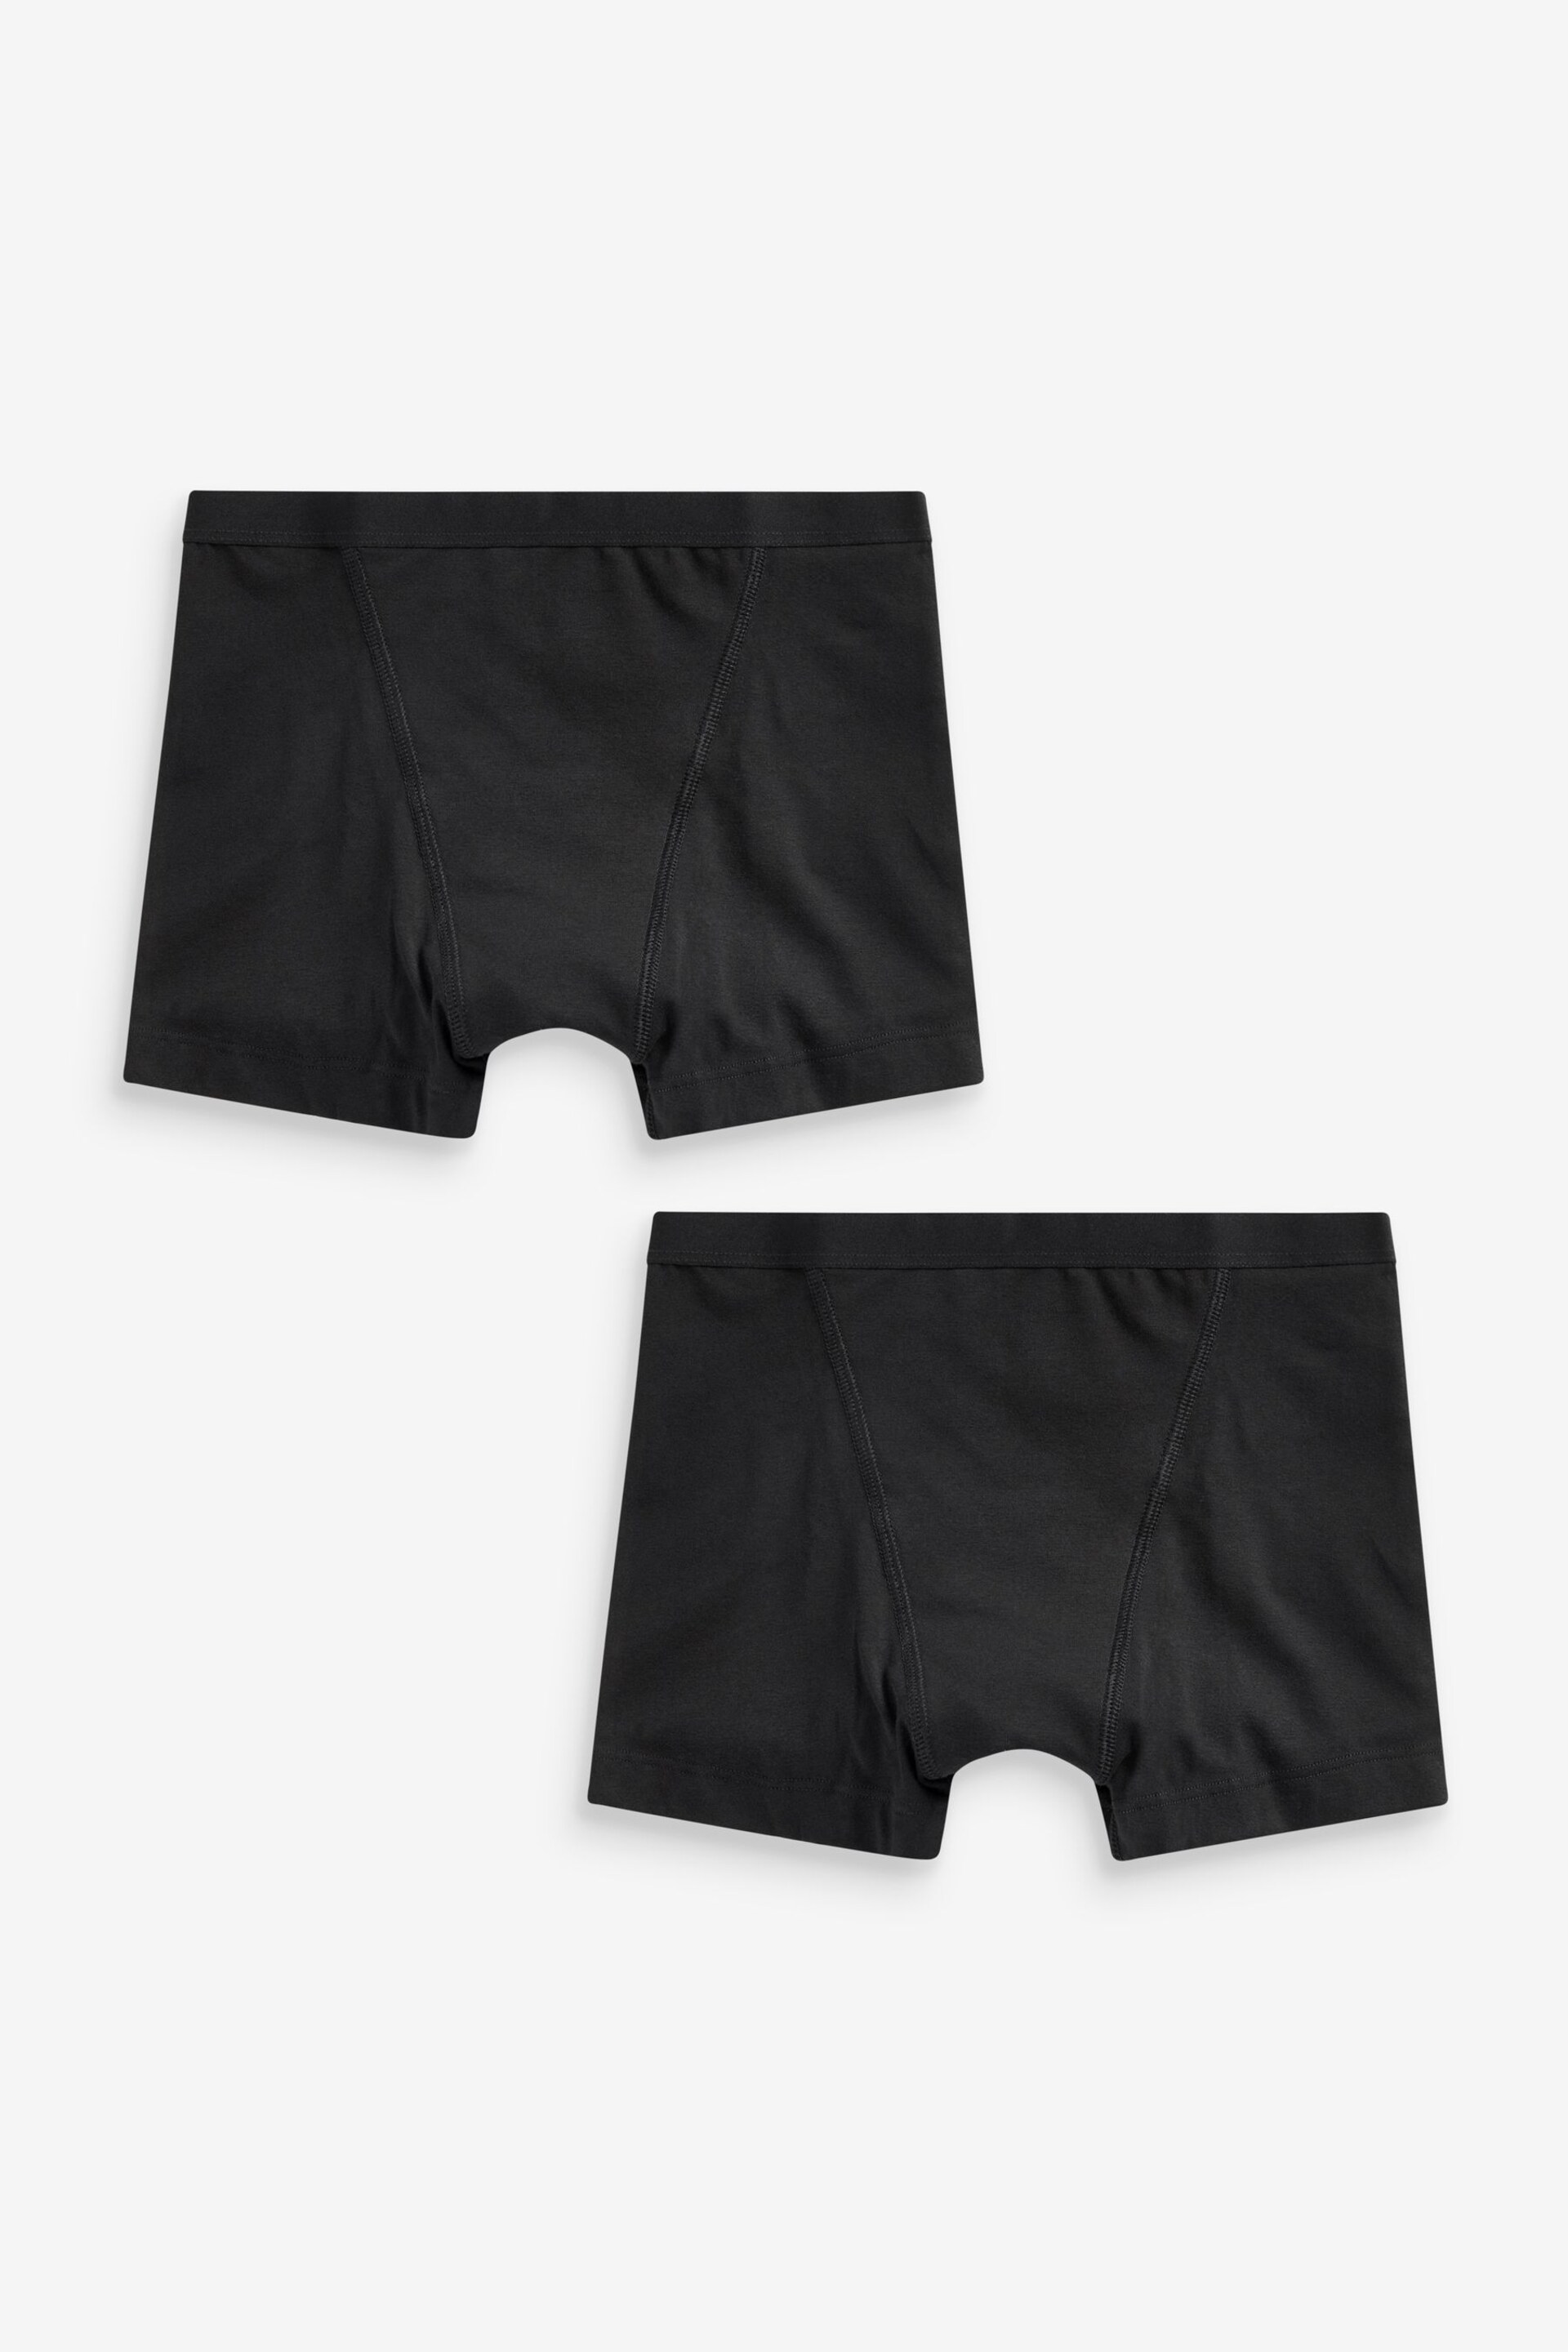 Black Shorts 2 Pack Teen Light Flow Period Pants (7-16yrs) - Image 1 of 4